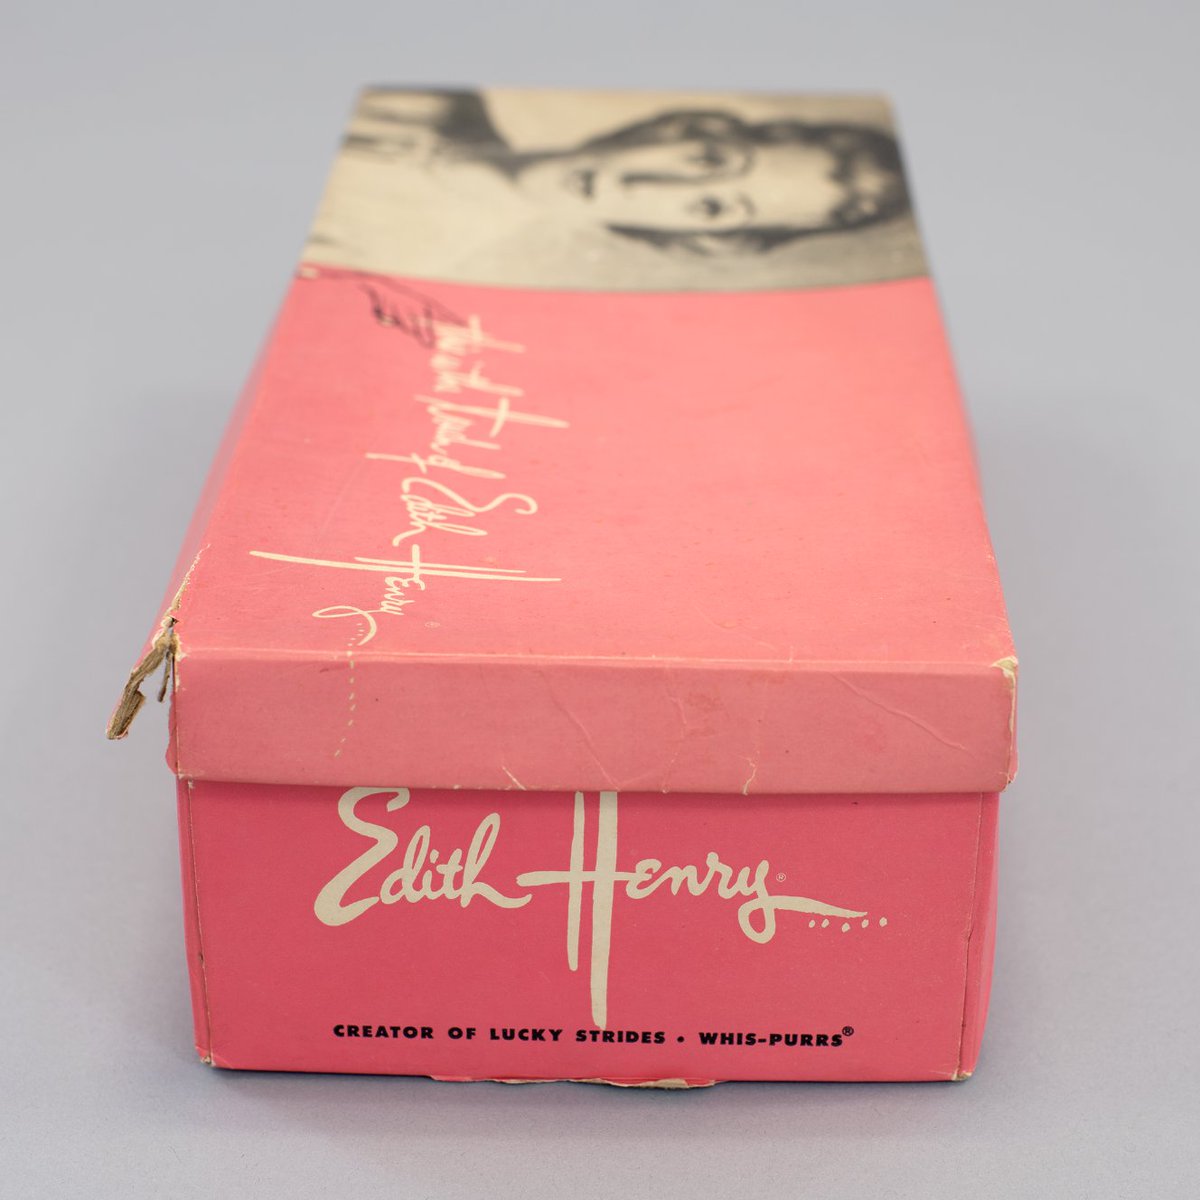 #WHM: Edith Entratter Henry and her husband, Carl Henry, opened Lucky Stride Shoes in the late 1940s. Edith designed popular women’s flats at a time when many women were joining the workforce. Manufactured under her name, they used the tag line “this is the touch of Edith Henry.”